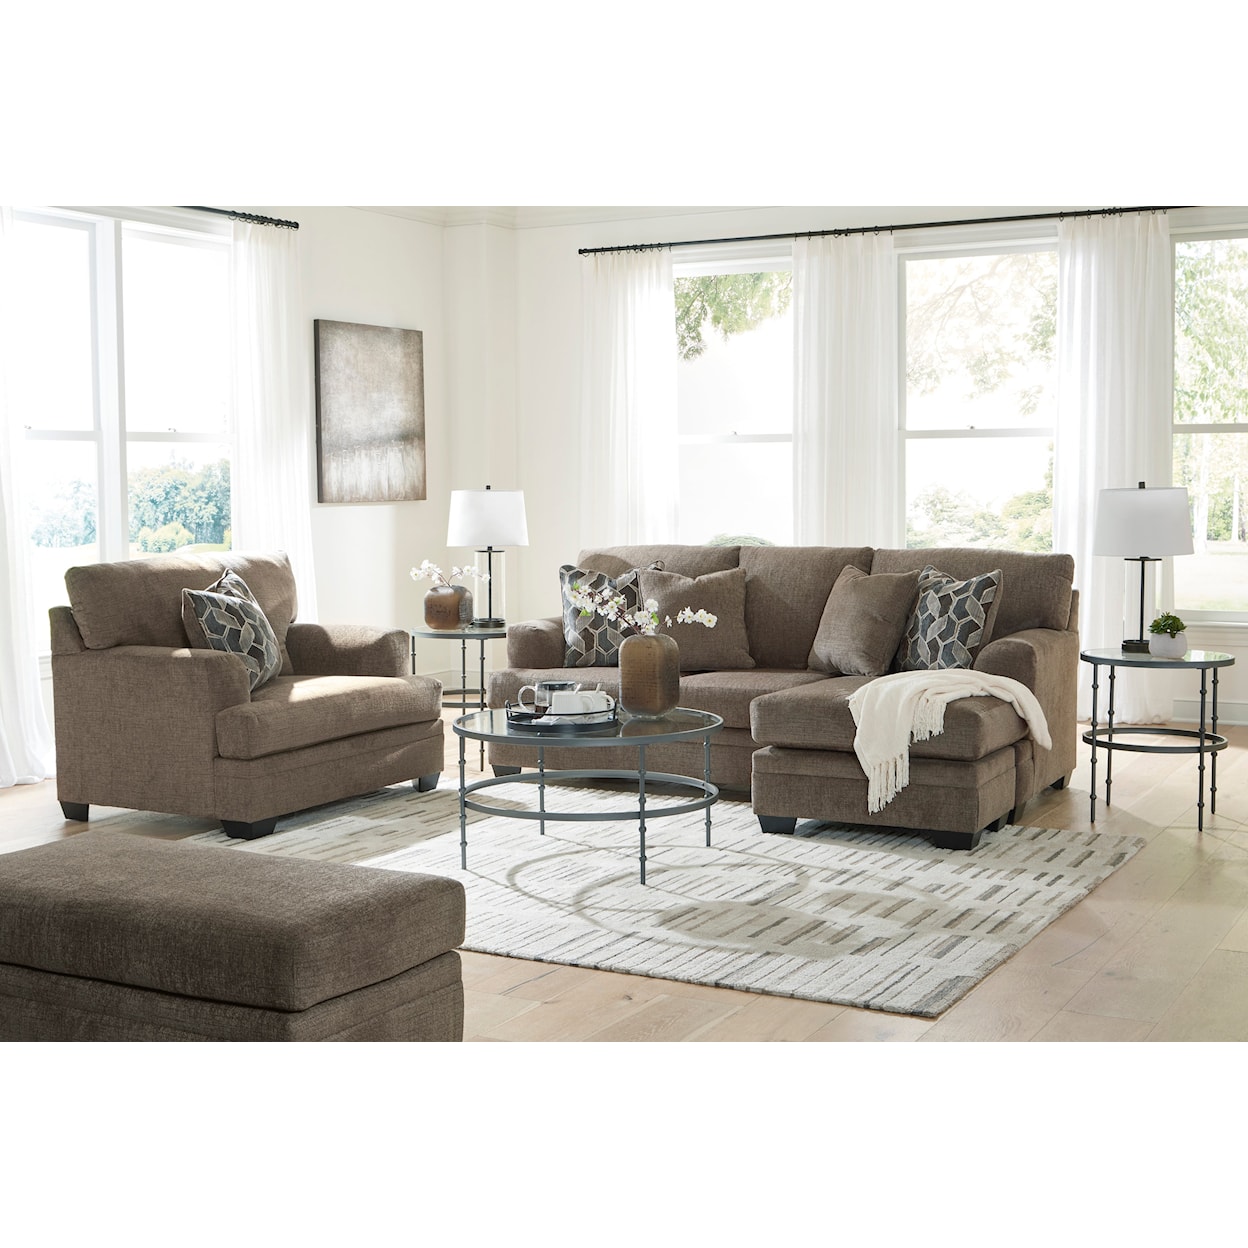 Ashley Signature Design Stonemeade Sofa Chaise, Oversized Chair and Ottoman